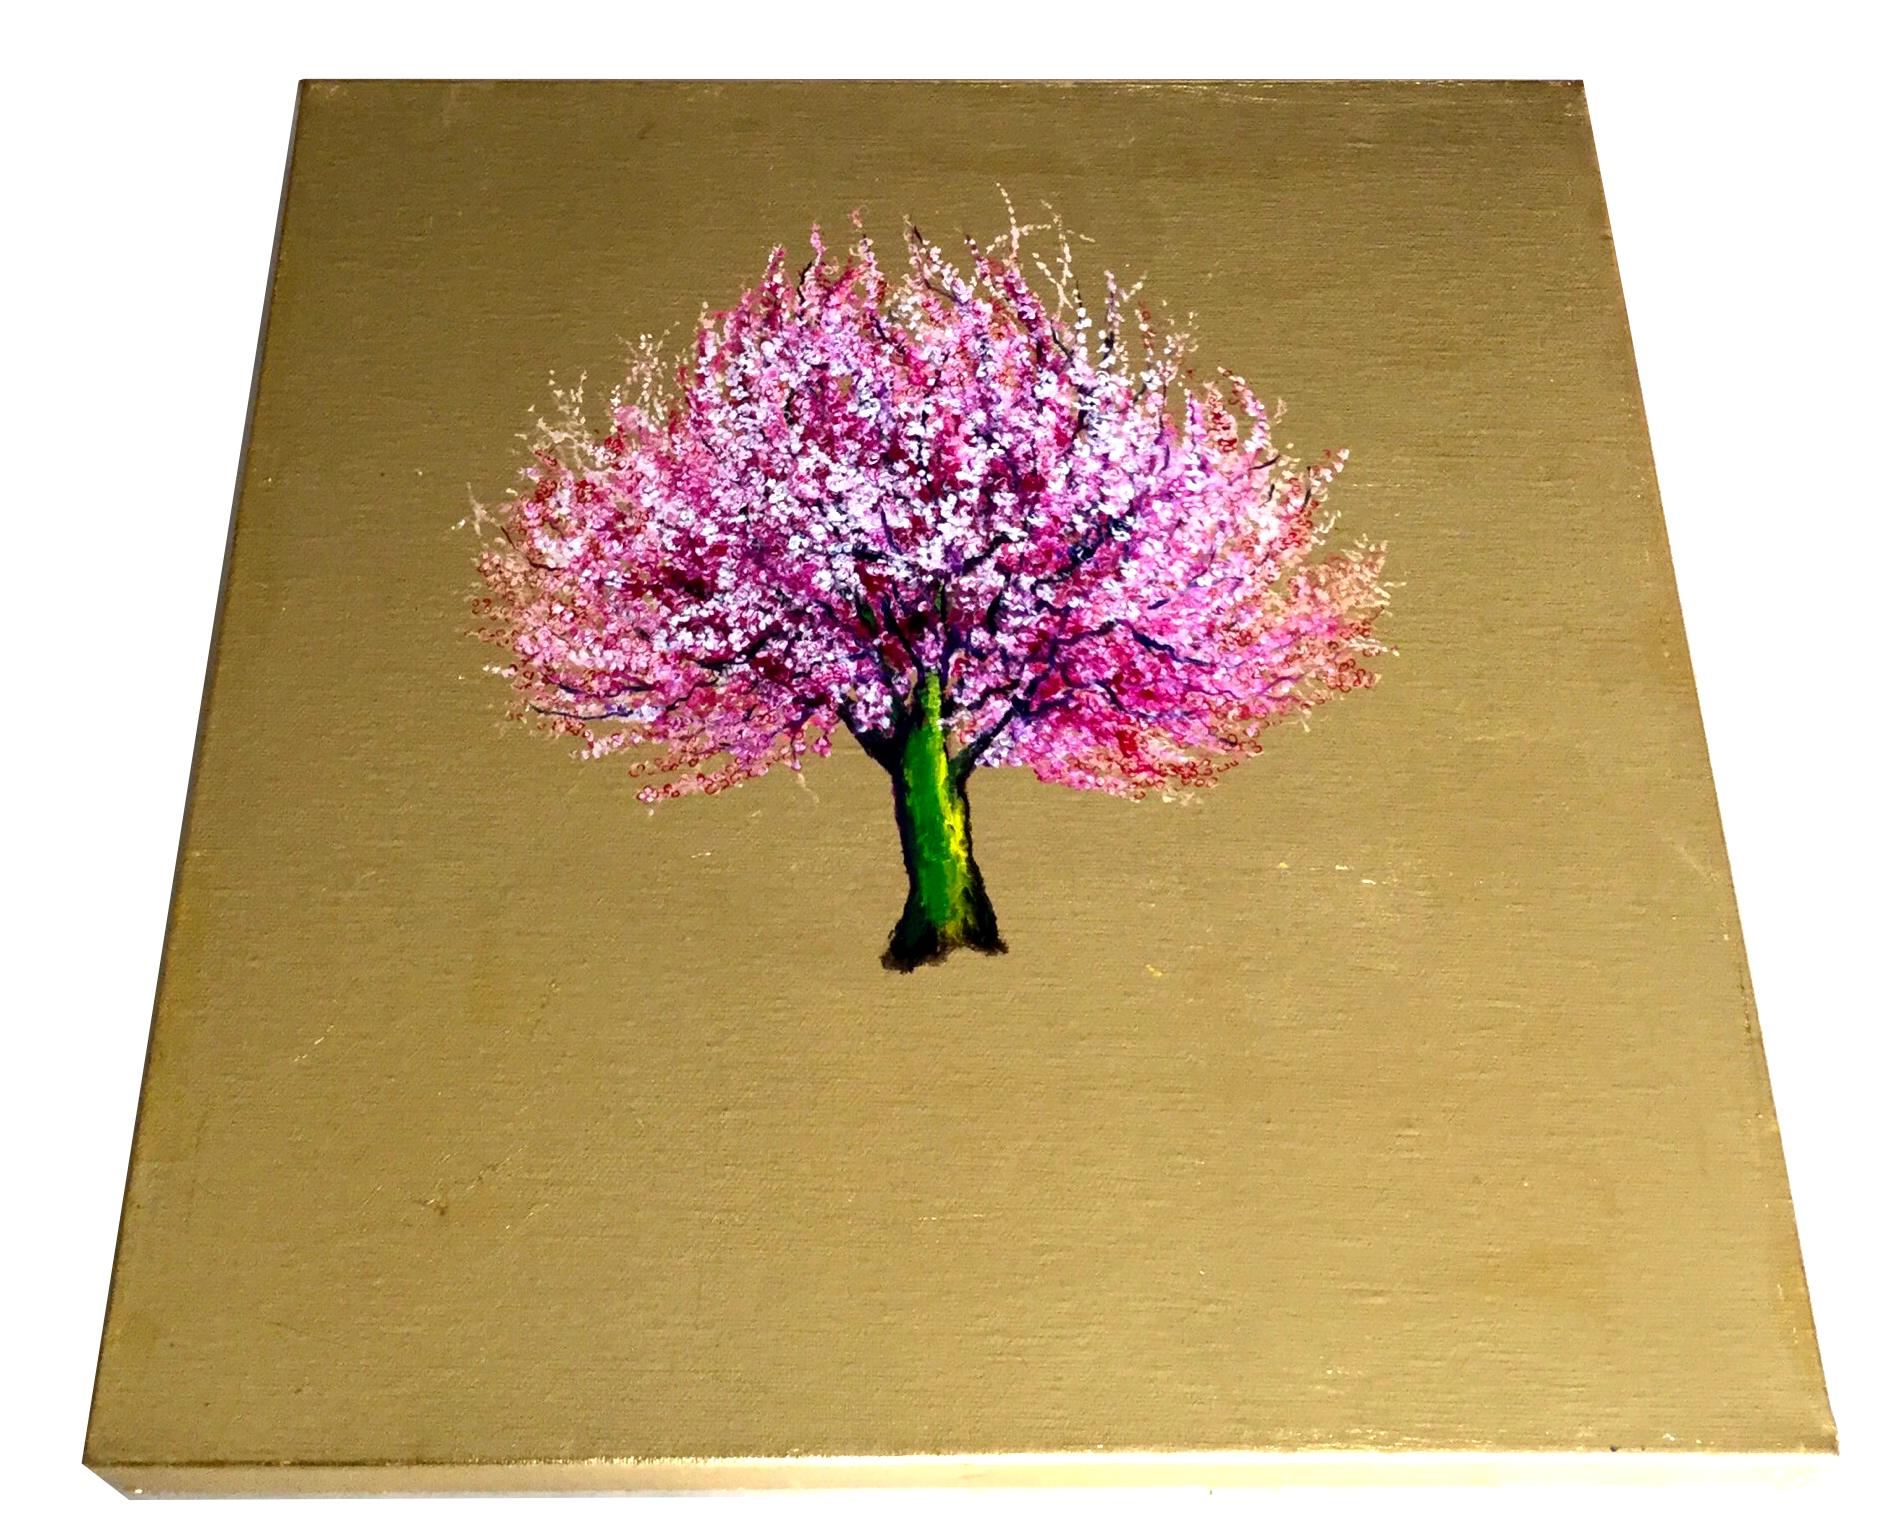 Morning Greeting, Elegant Oil on Canvas with Gold Leaf, Pink Tree & Flowers  - Contemporary Painting by Anastasia Gklava